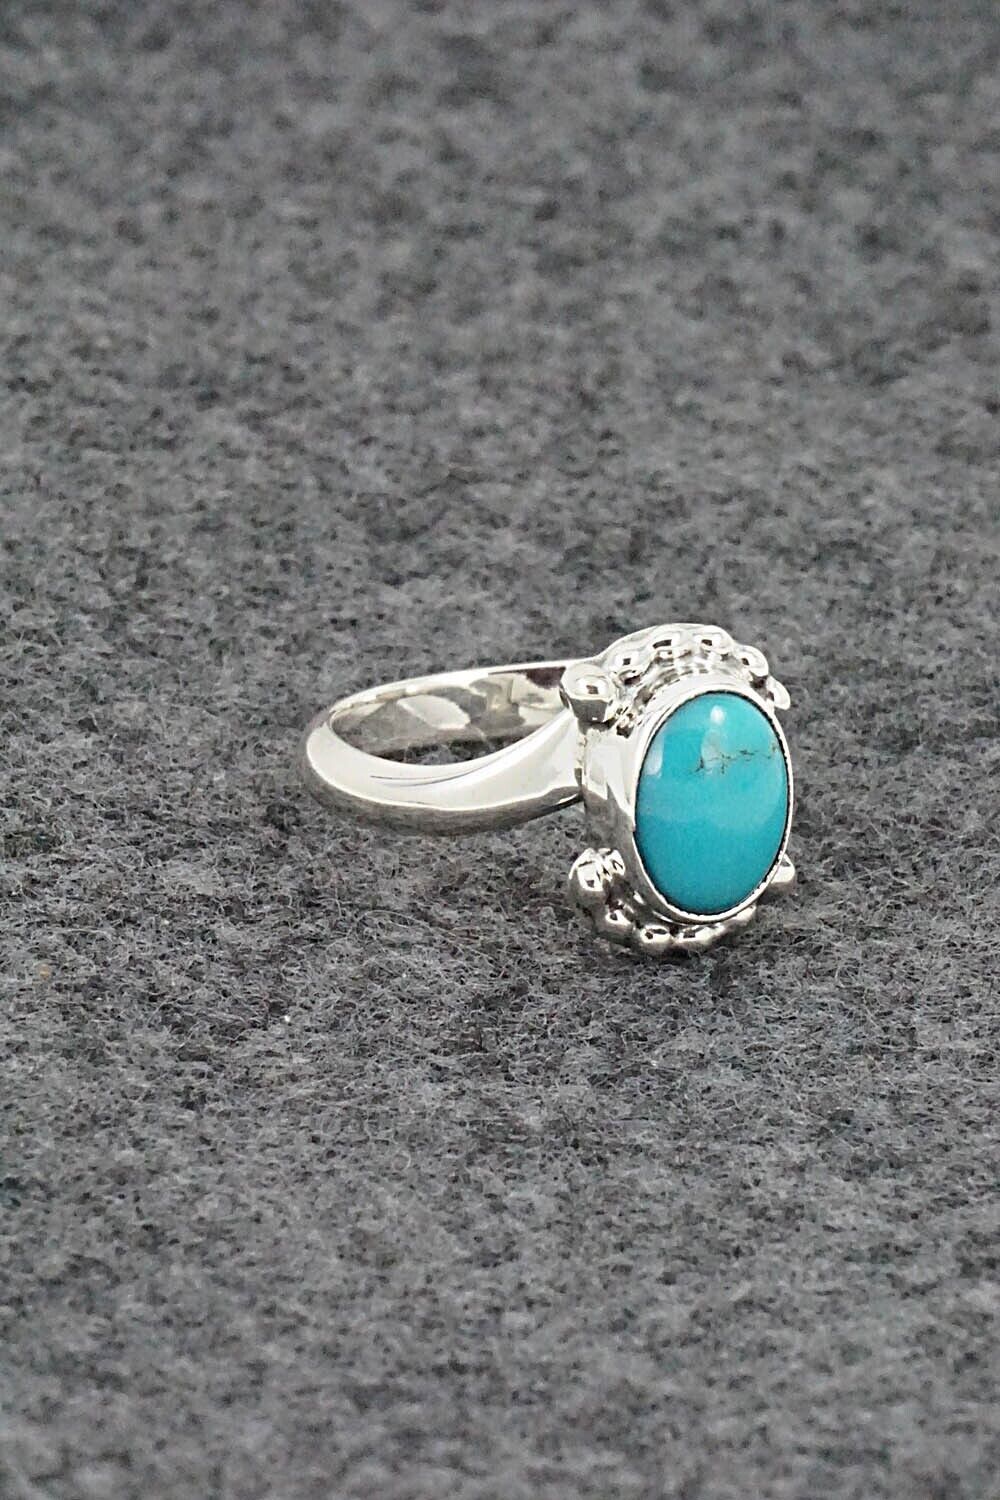 Turquoise & Sterling Silver Ring - William Begay - Size 5.25